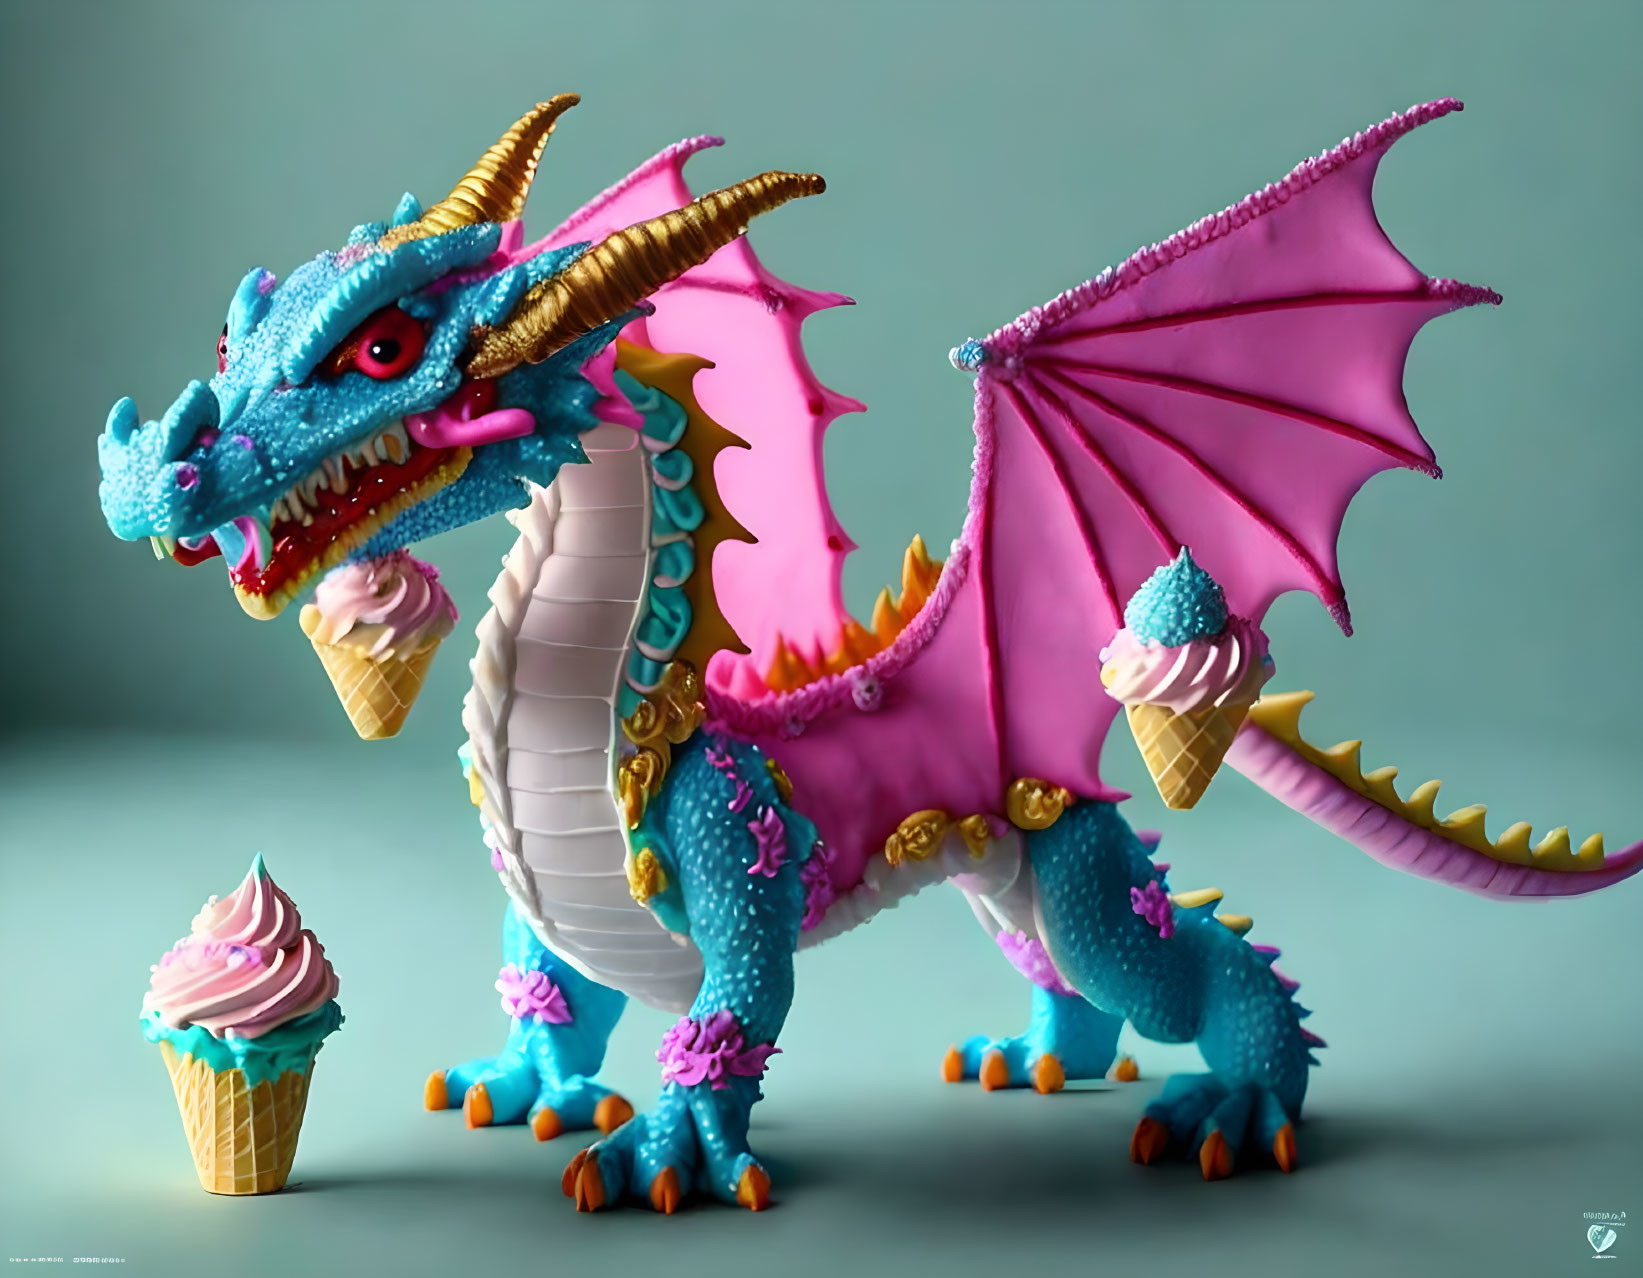 Colorful Dragon with Ice Cream Cone Details and Pink Wings Standing by Ice Cream Cones